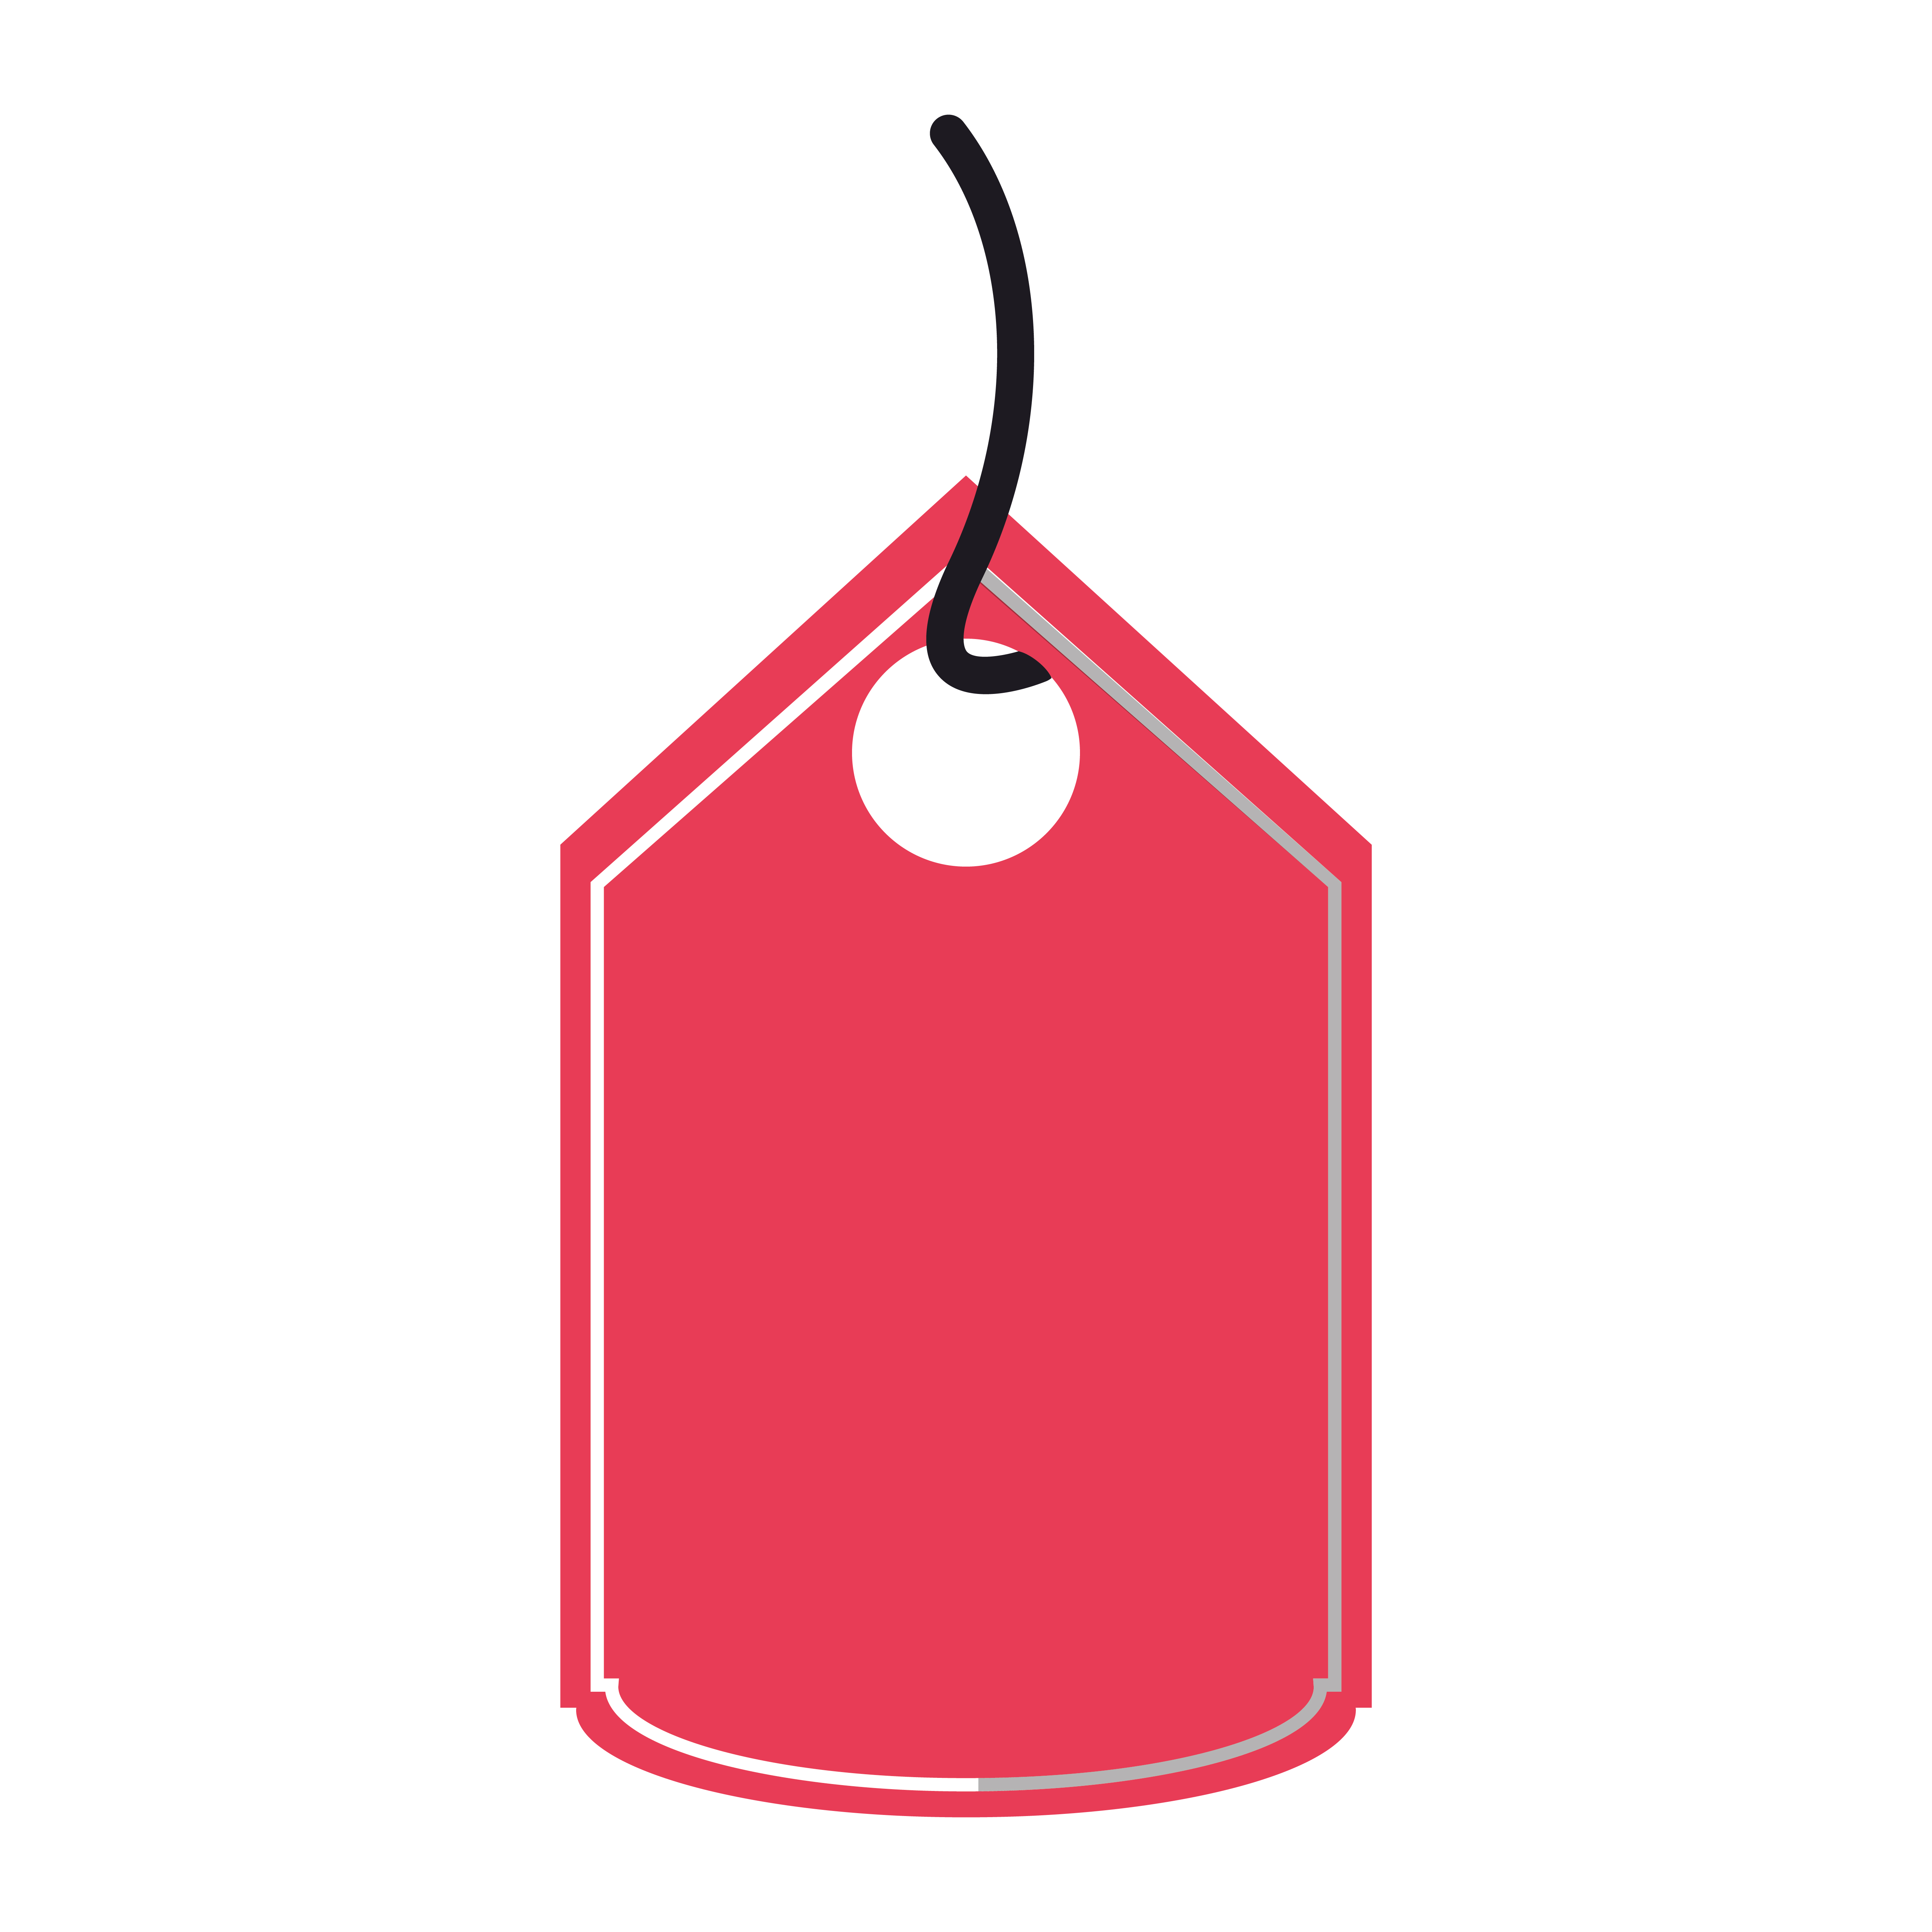 https://static.vecteezy.com/system/resources/previews/001/540/918/original/shopping-red-tag-isolated-icon-free-vector.jpg